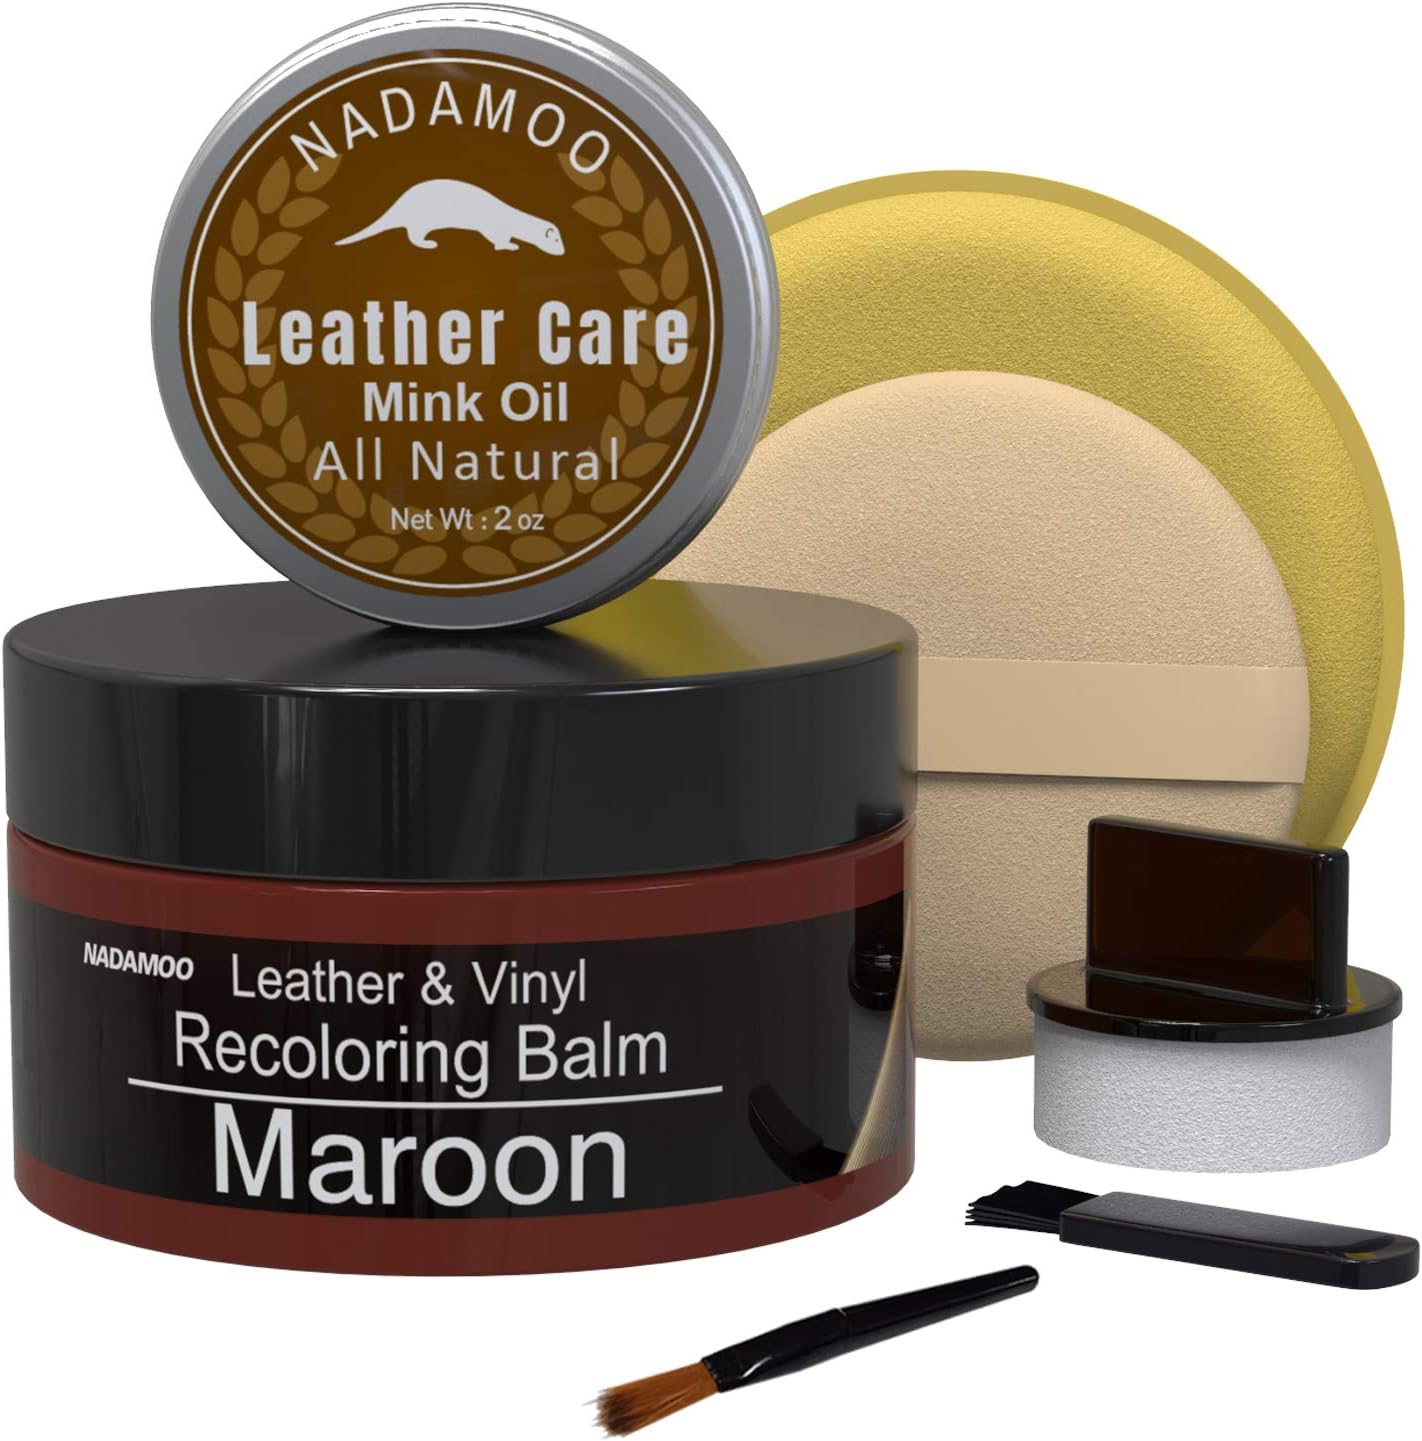 NADAMOO Maroon Leather Recoloring Balm with Mink Oil [...]